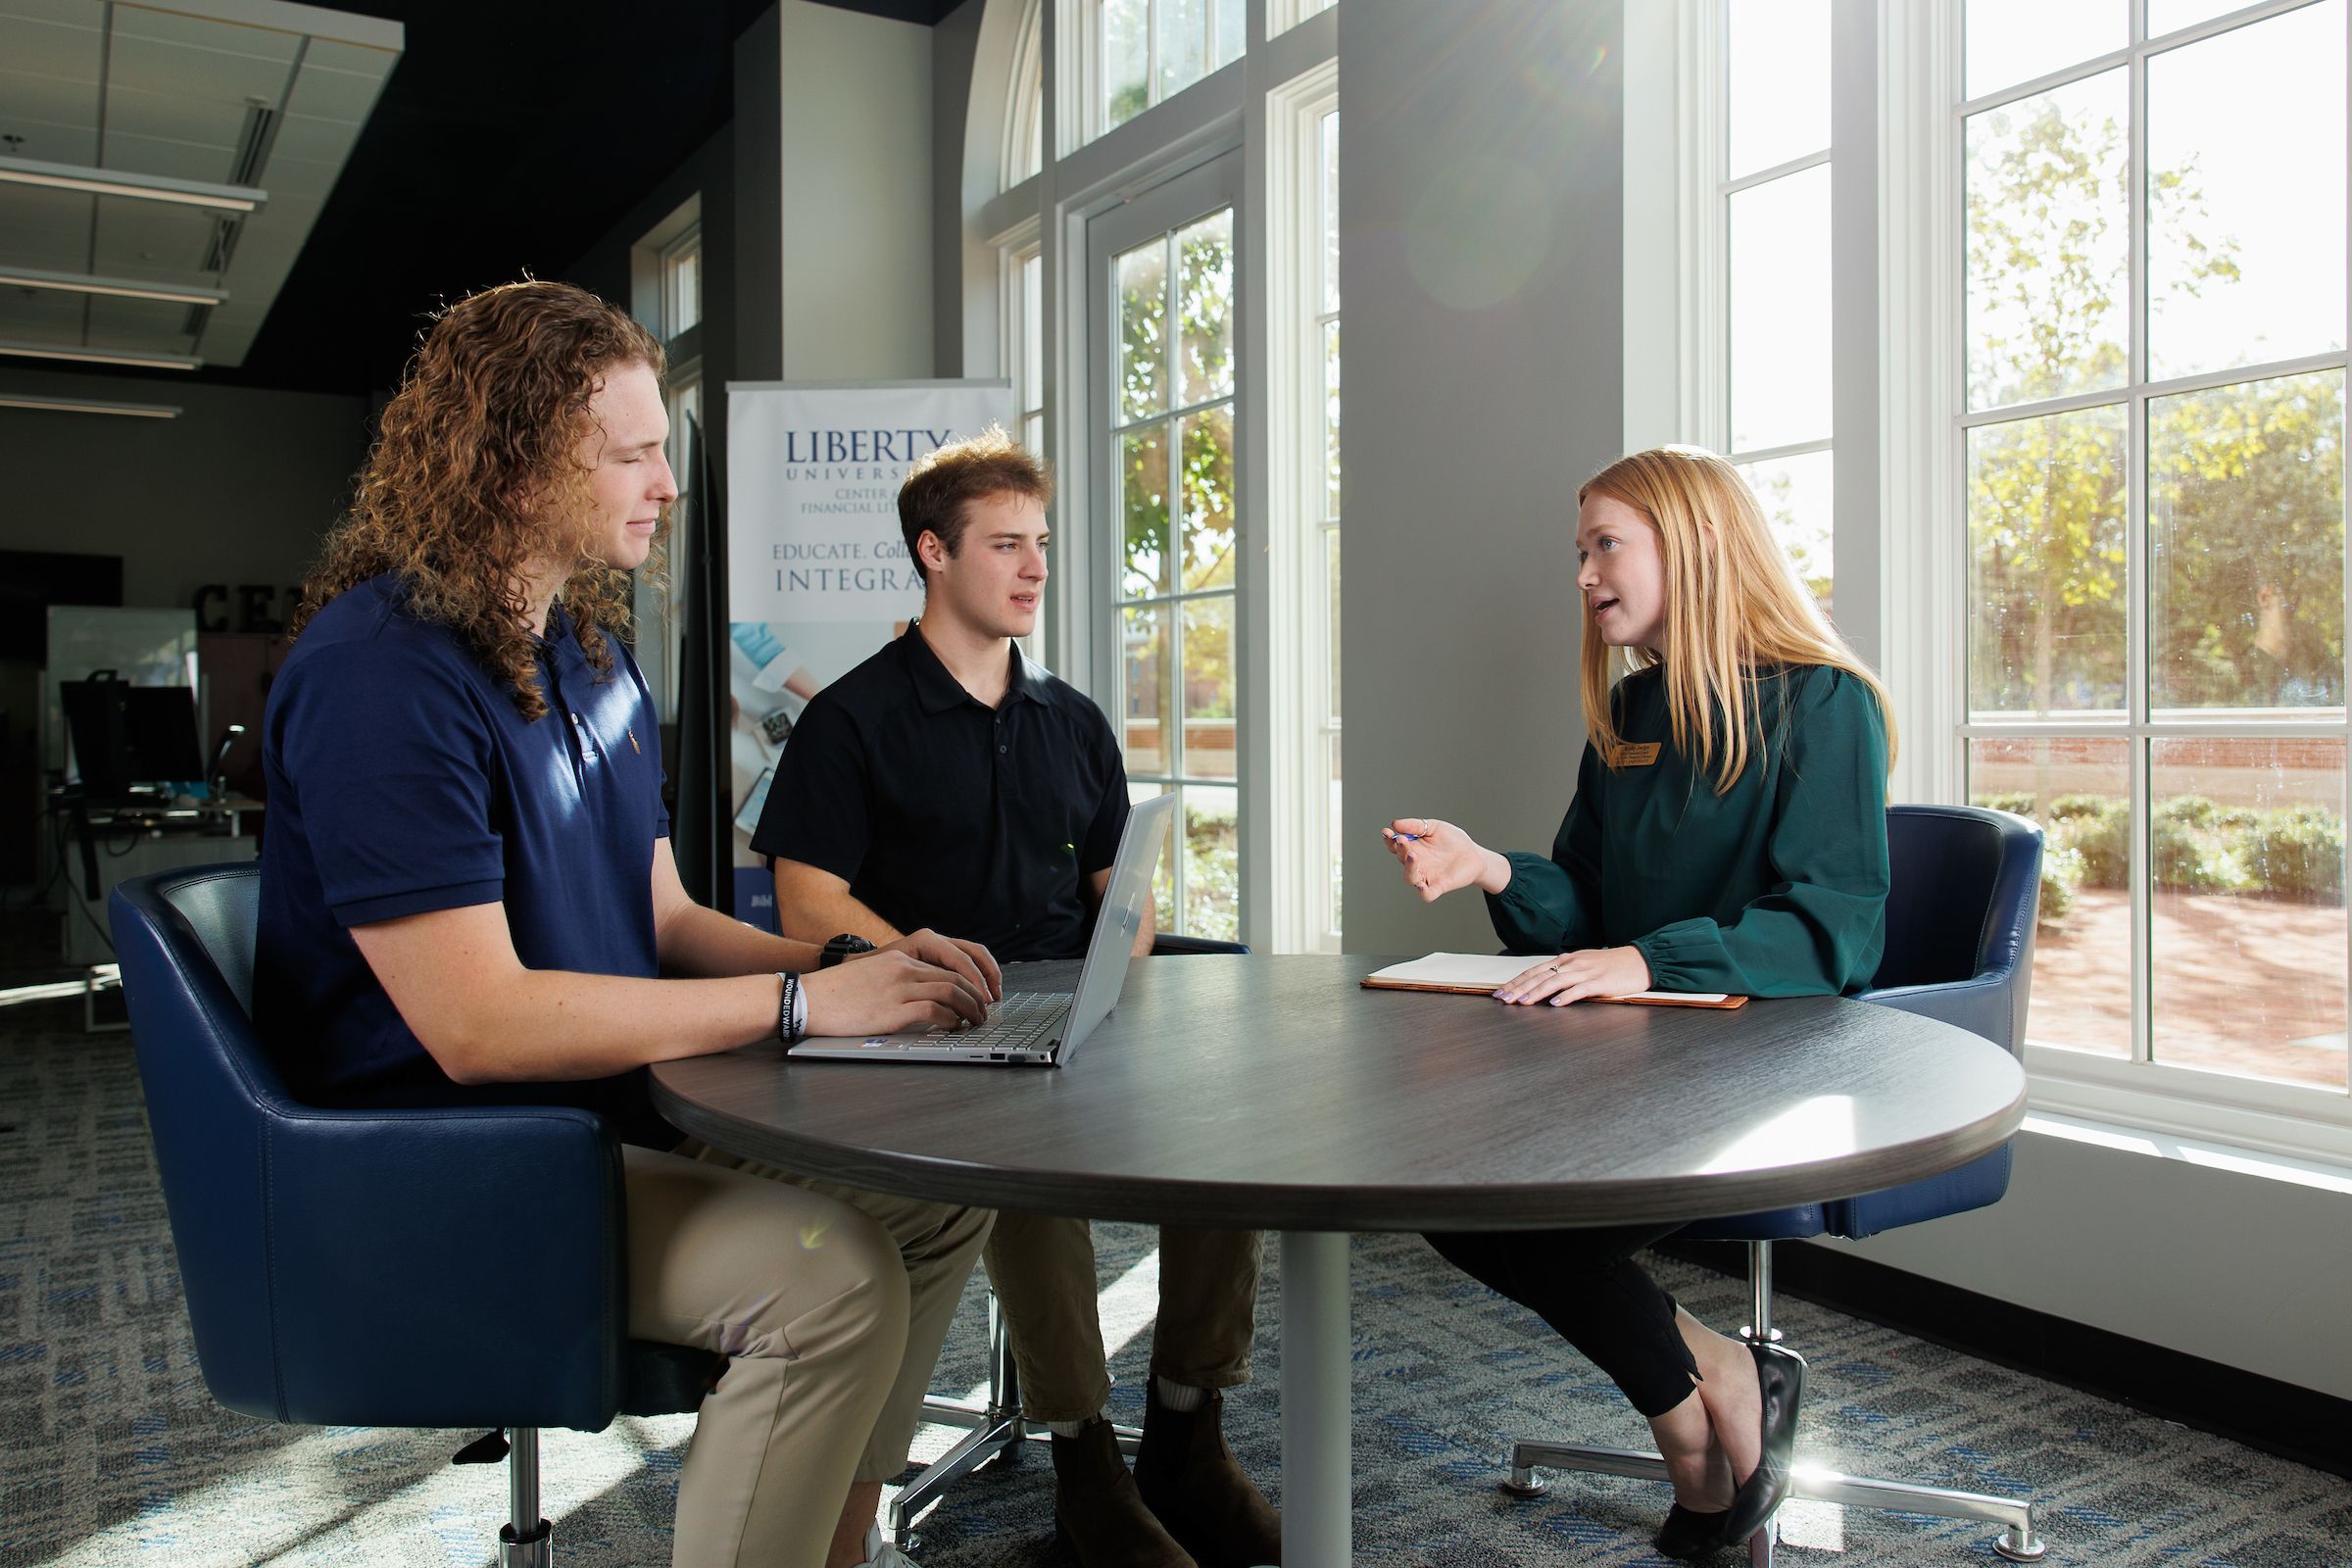 Professional Connection Opportunities Through Liberty University